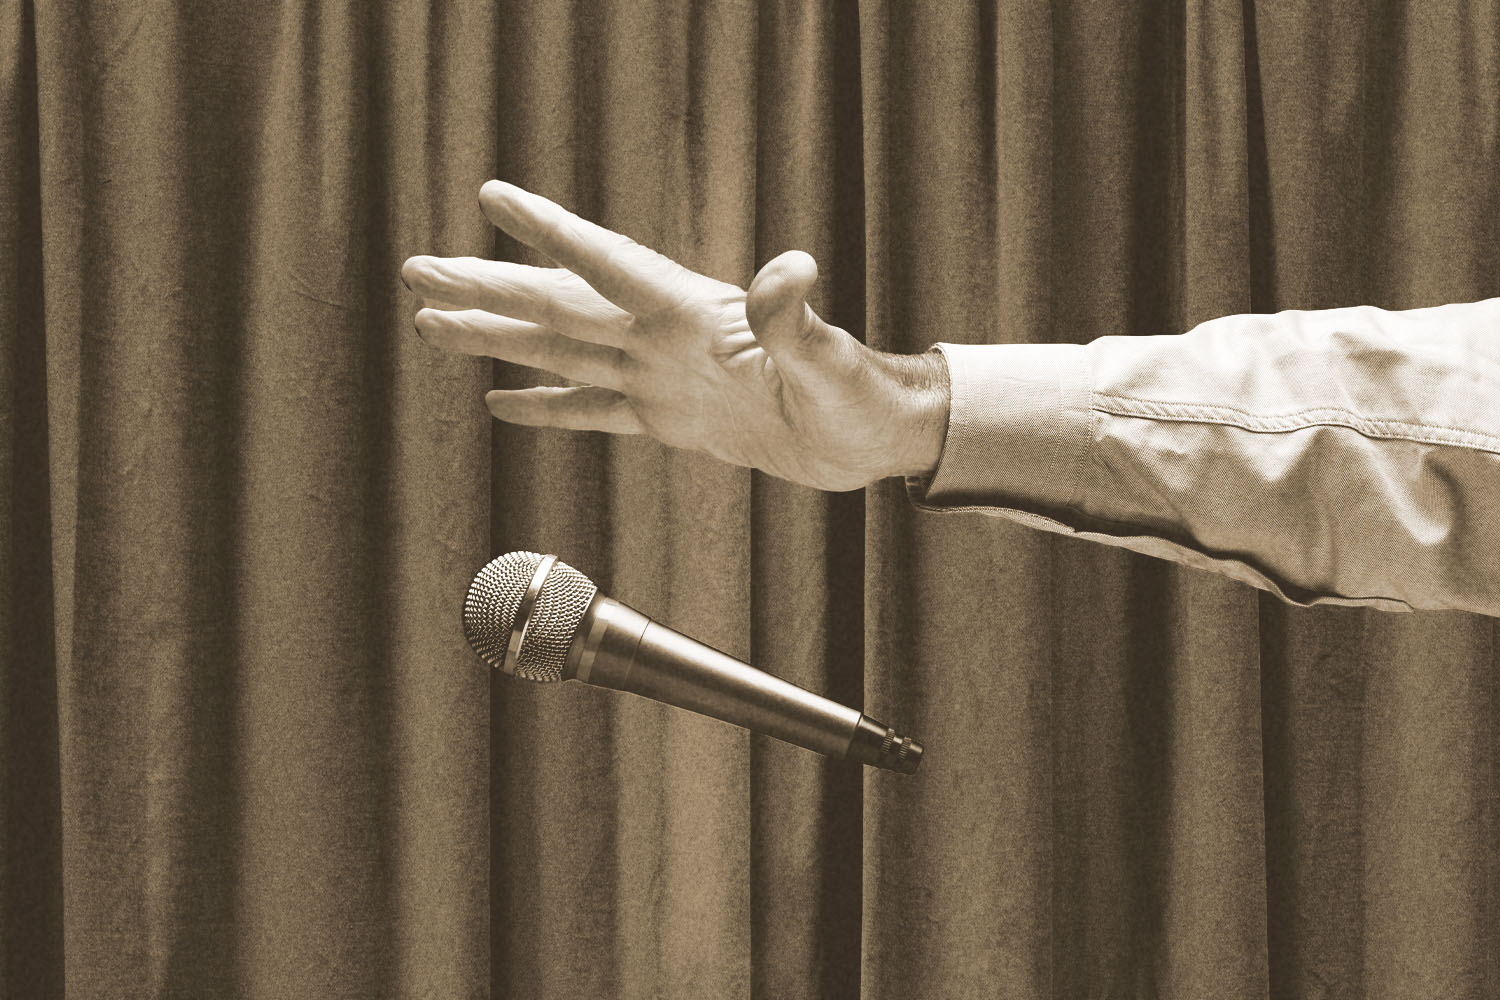 A gloved hand drops a microphone in front of a curtain.